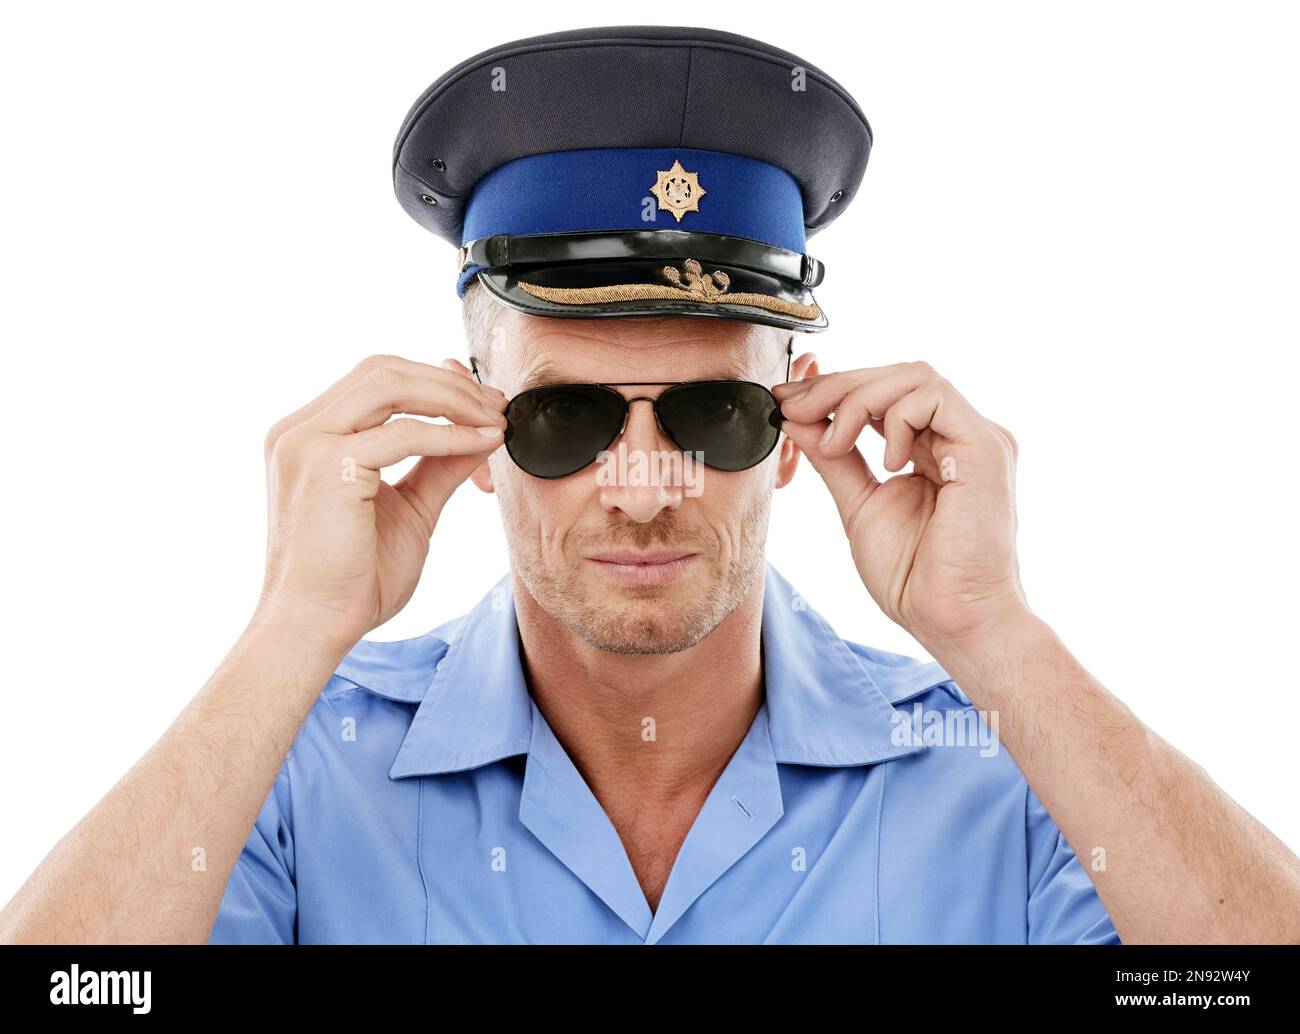 Security, officer and face of police with sunglasses on white background for authority, public safety and crime. Justice, law enforcement and portrait Stock Photo